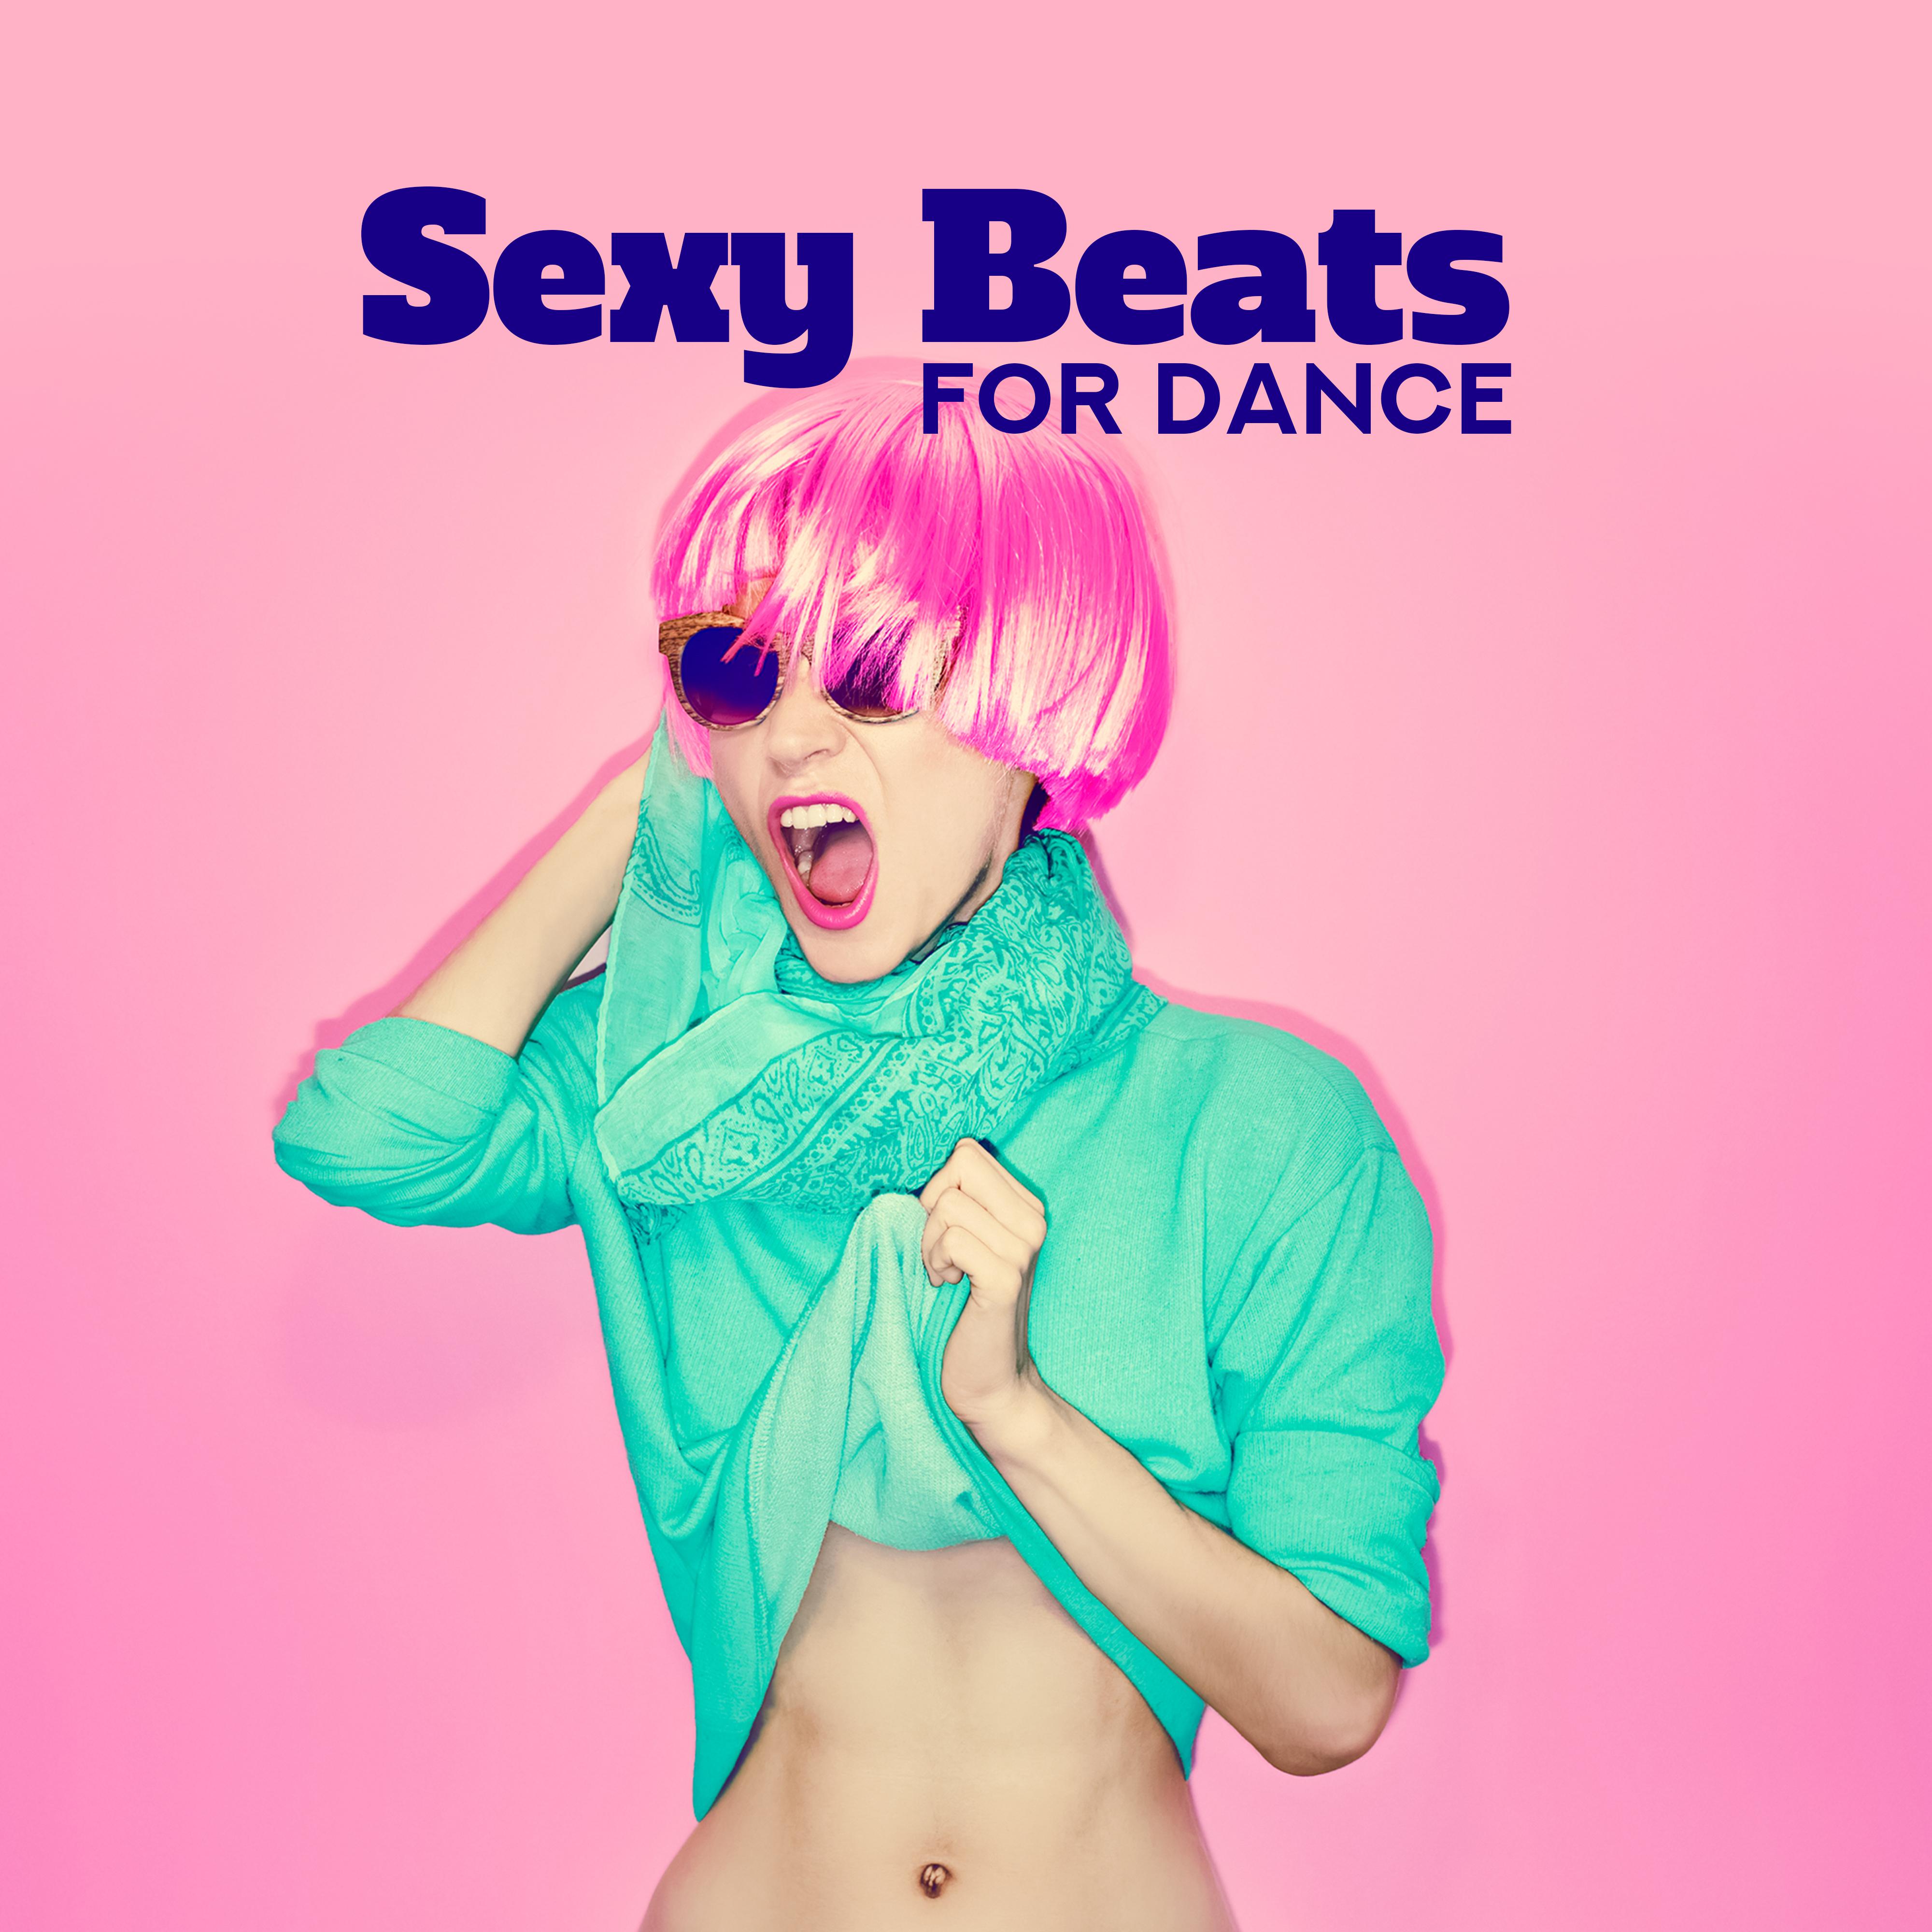 Sexy Beats for Dance: Ibiza Dance Party, Chillout Hits 2019, Sunny Chillout Beats, Summer 2019, Deep Relax